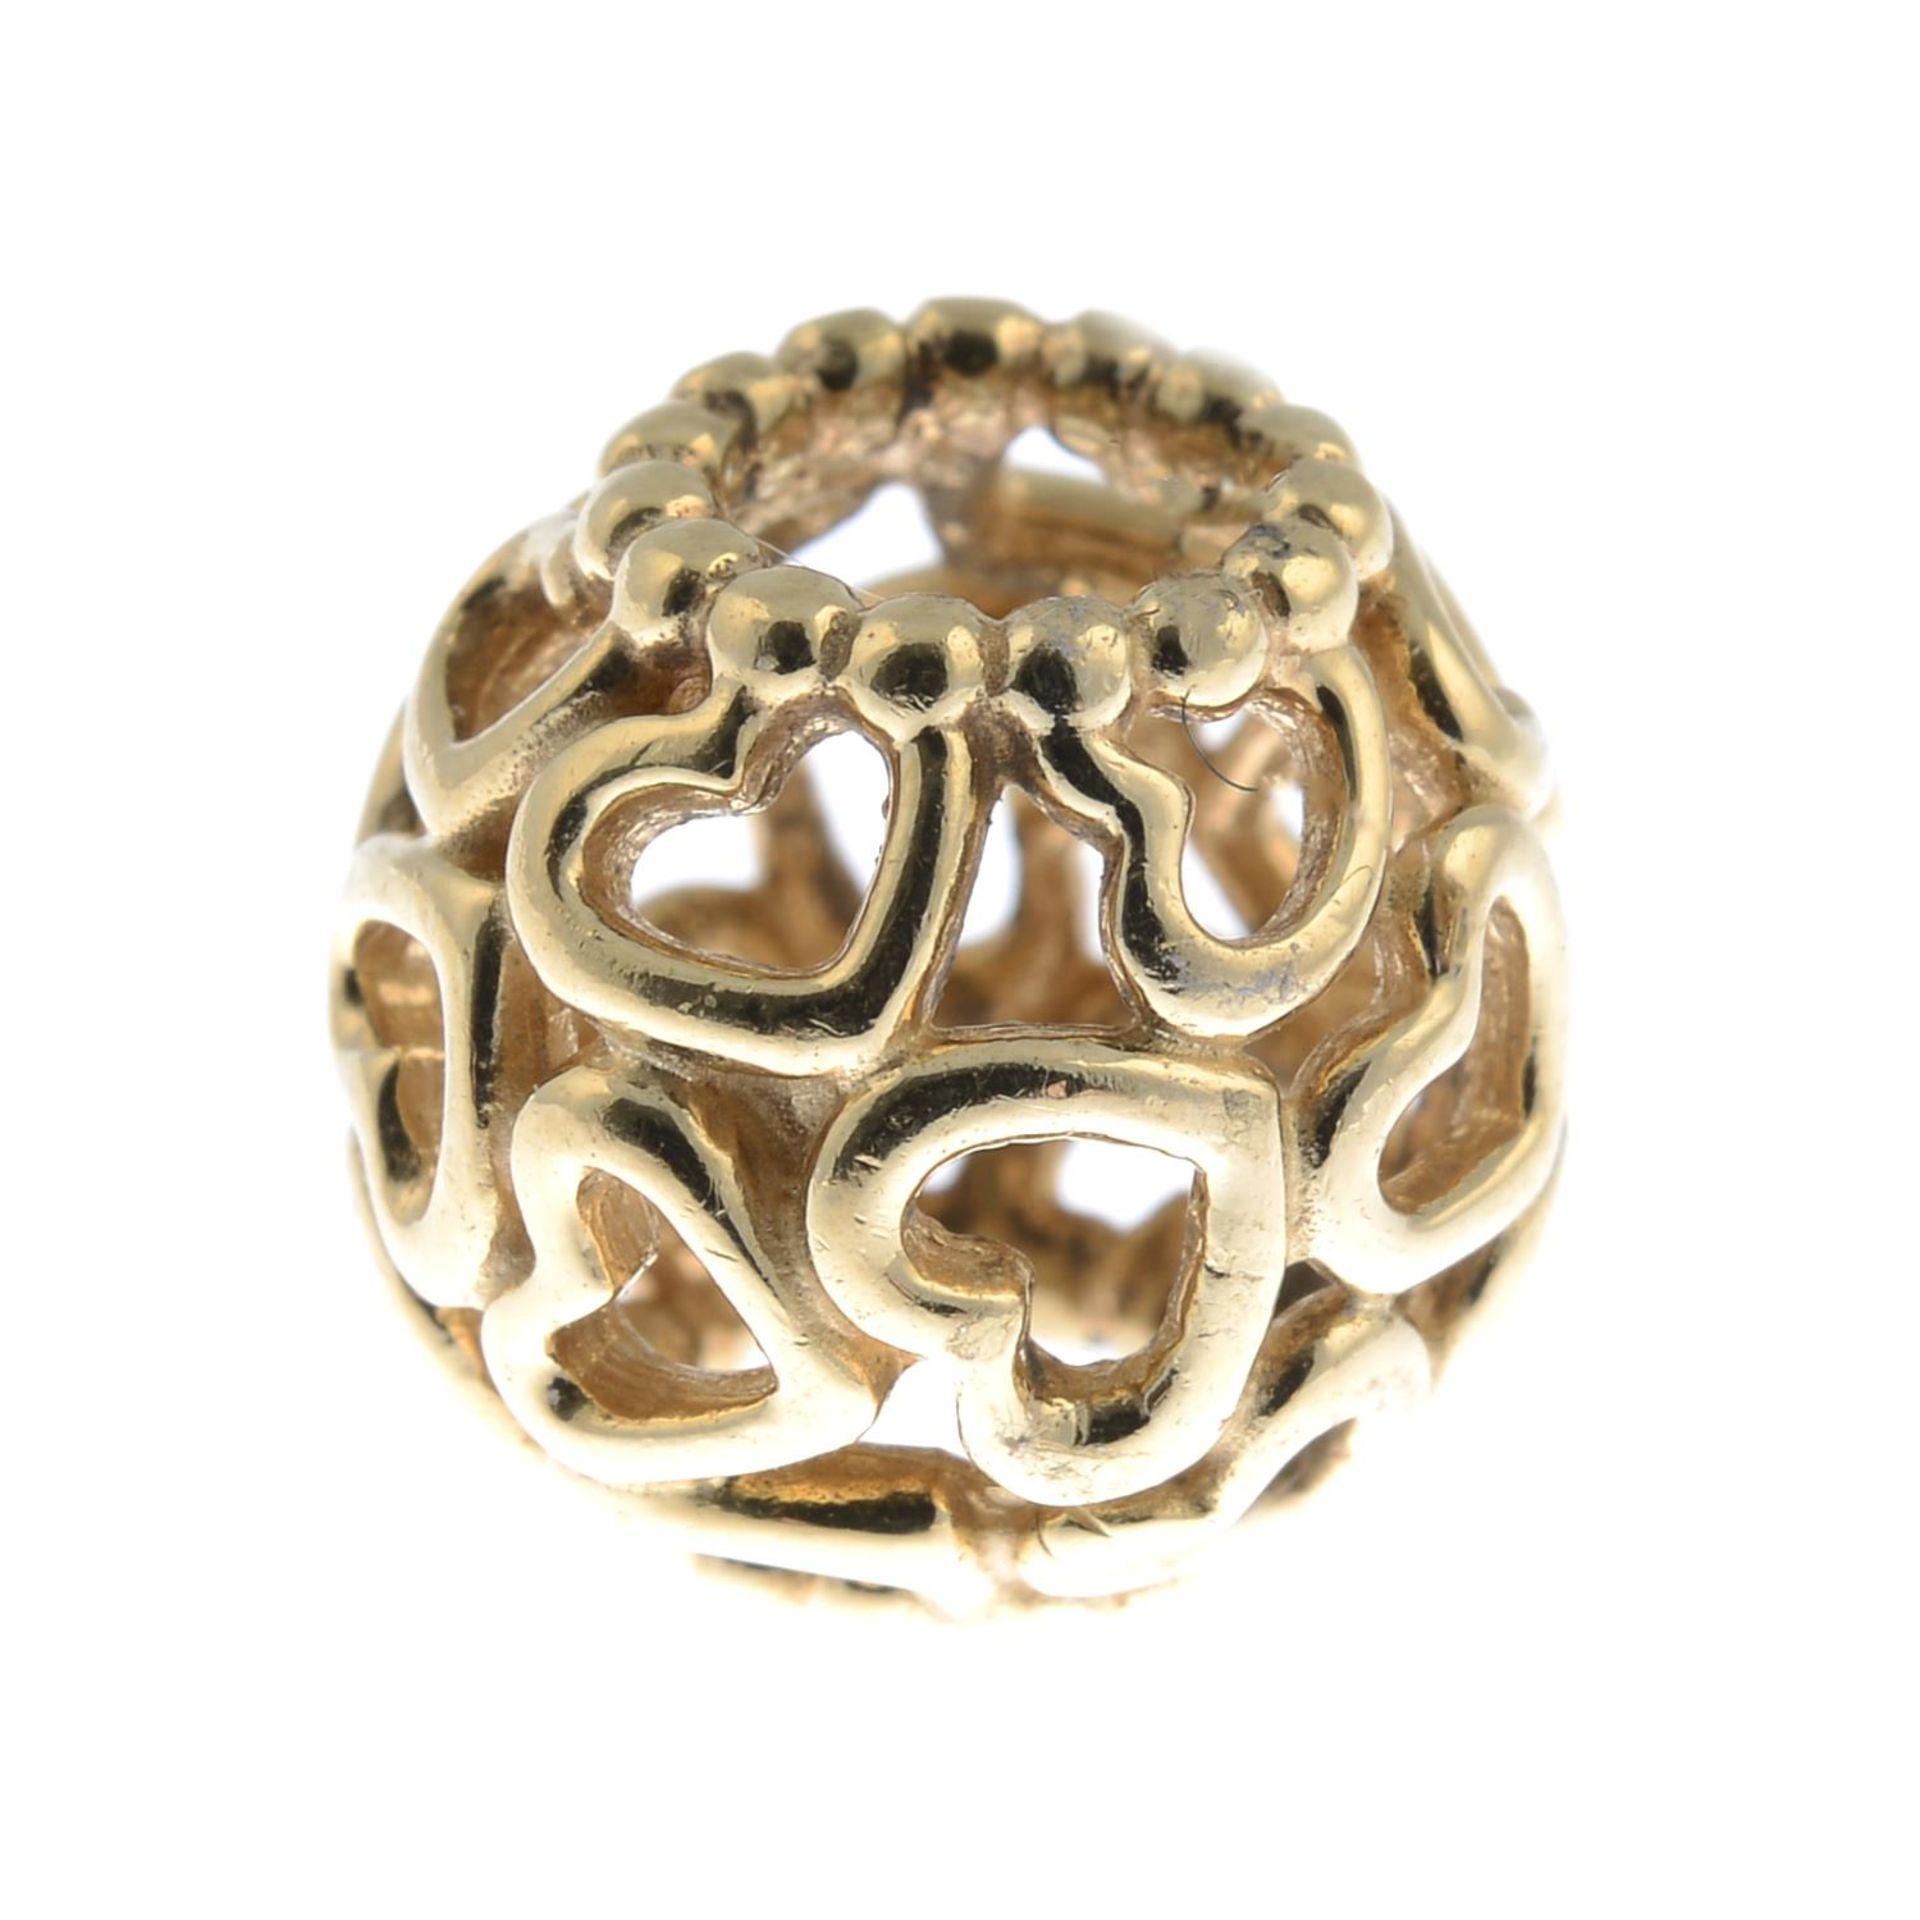 A 14ct gold openwork charm.Hallmarks for 14ct gold. - Image 2 of 2